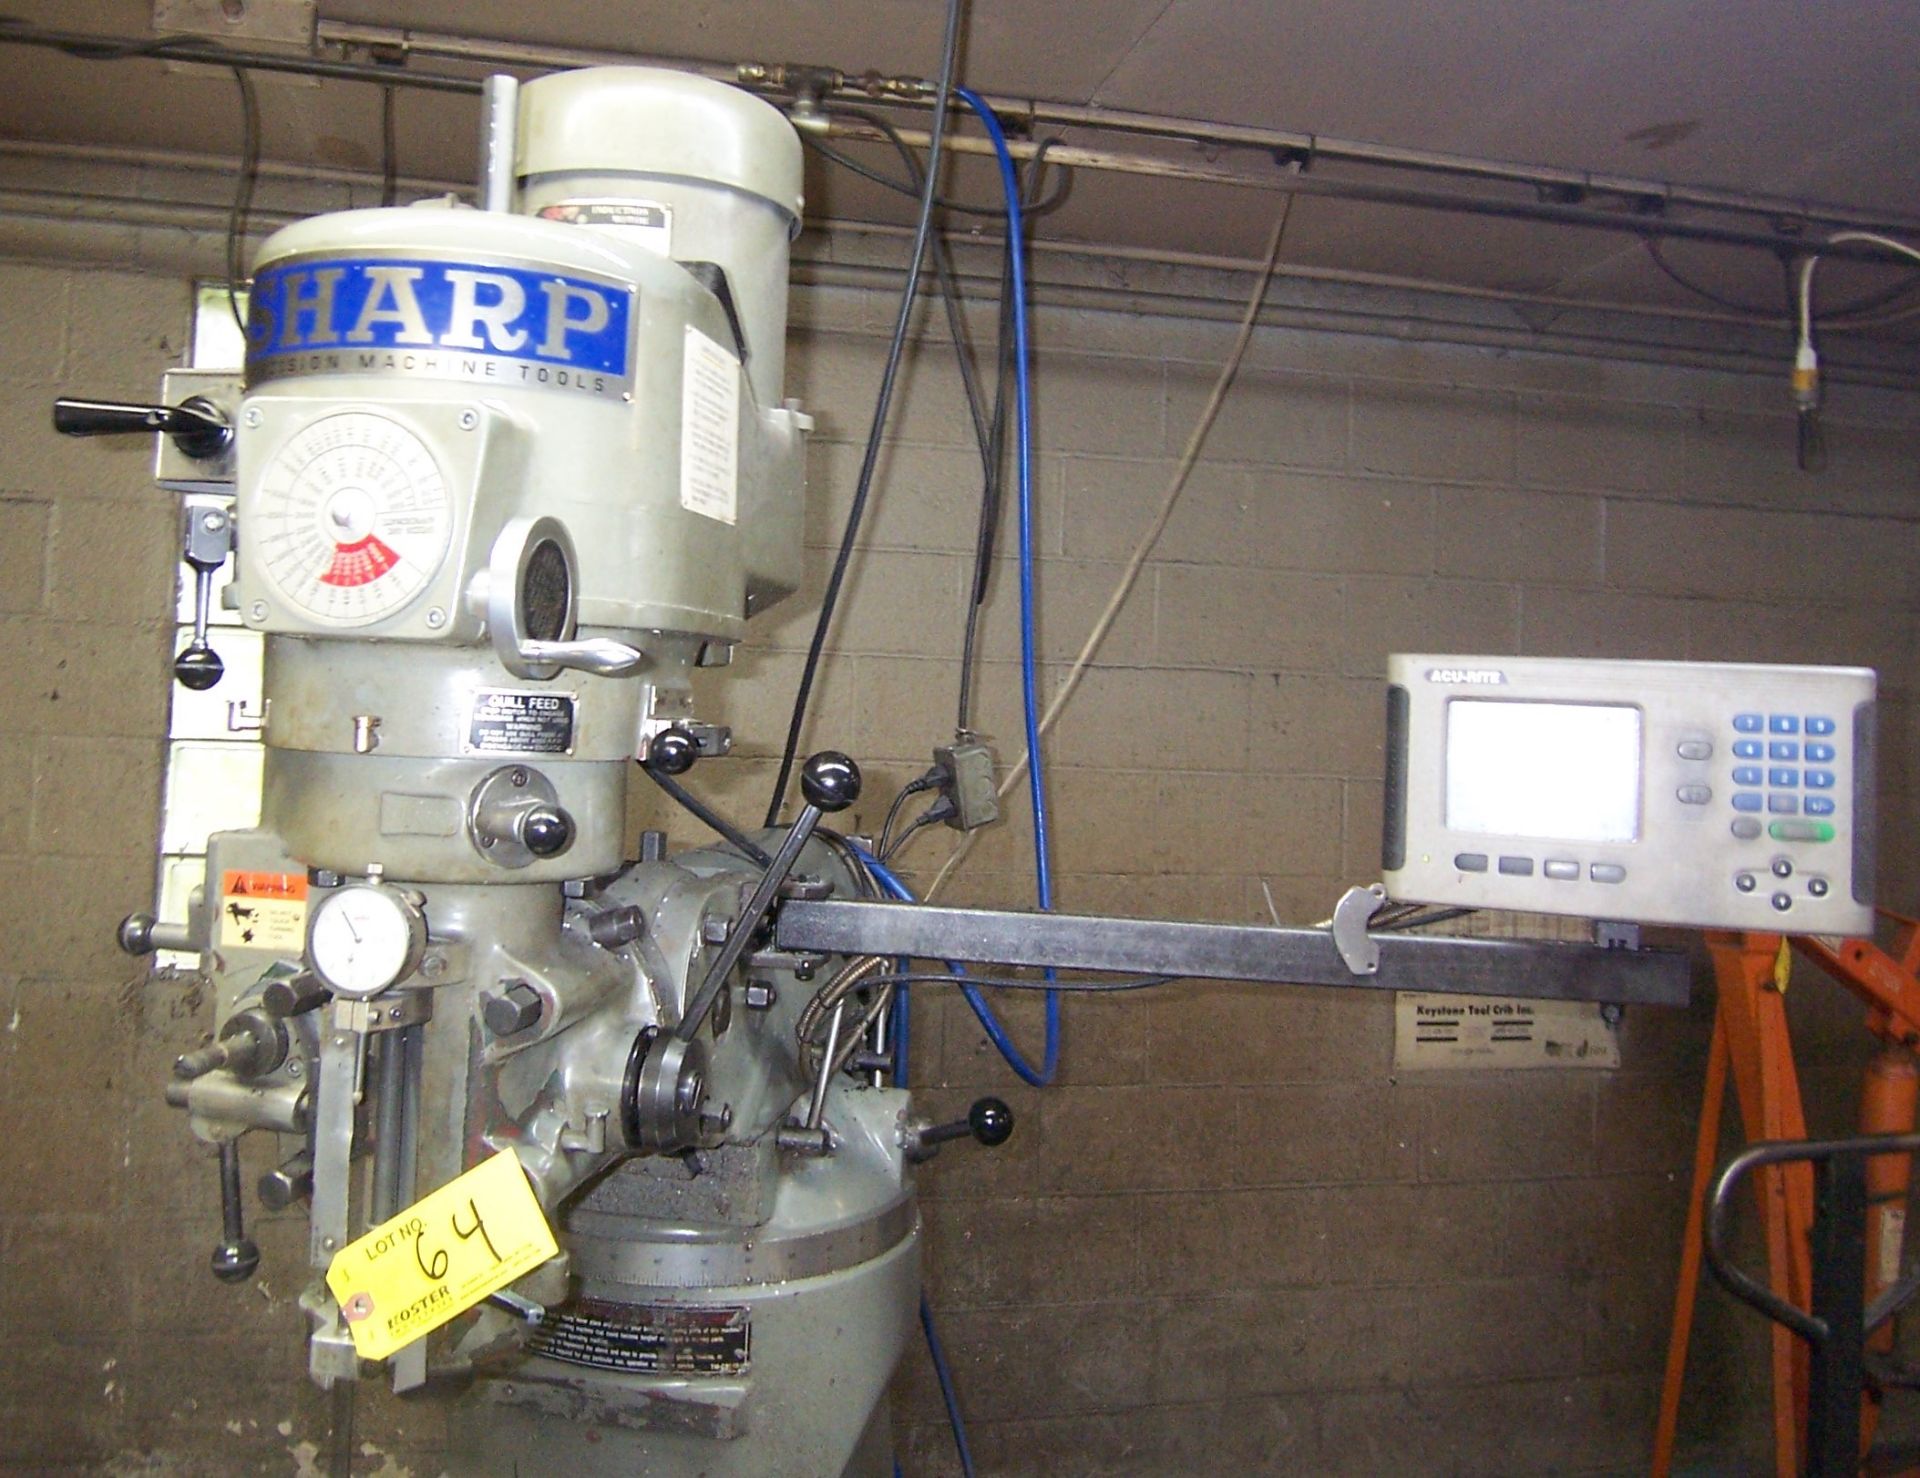 SHARP 3HP VARI-SPEED VERTICAL MILLING MACHINE WITH 9" X 50" POWER FEED TABLE, SPINDLE SPEEDS TO 4, - Image 4 of 4